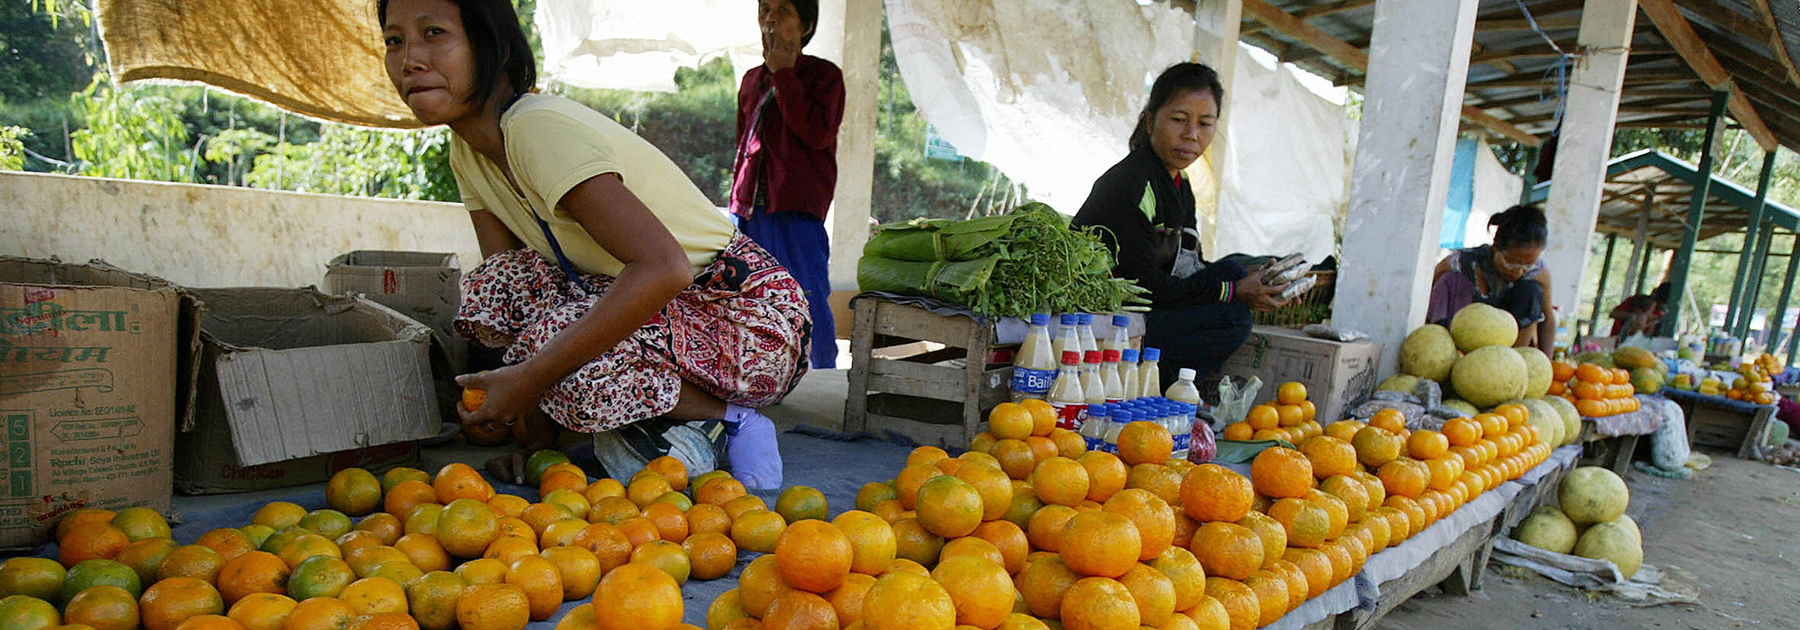 Mizo women sell fruit and vegetables at the roadside in Aizawl, capital of the north-eastern state of Mizoram. (DIPTENDU DUTTA/AFP/Getty Images)